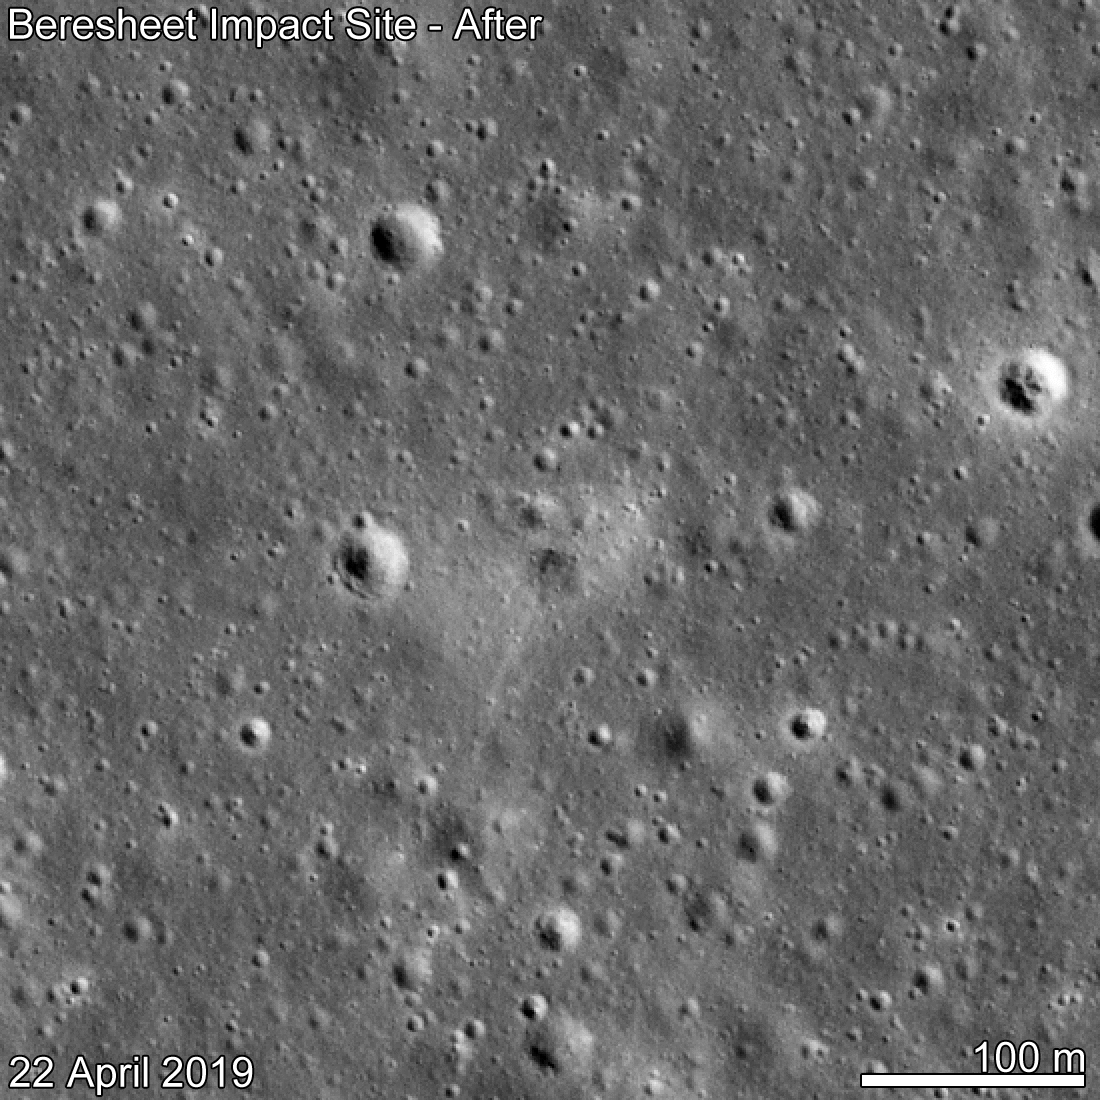 Animation of site on lunar surface showing impact